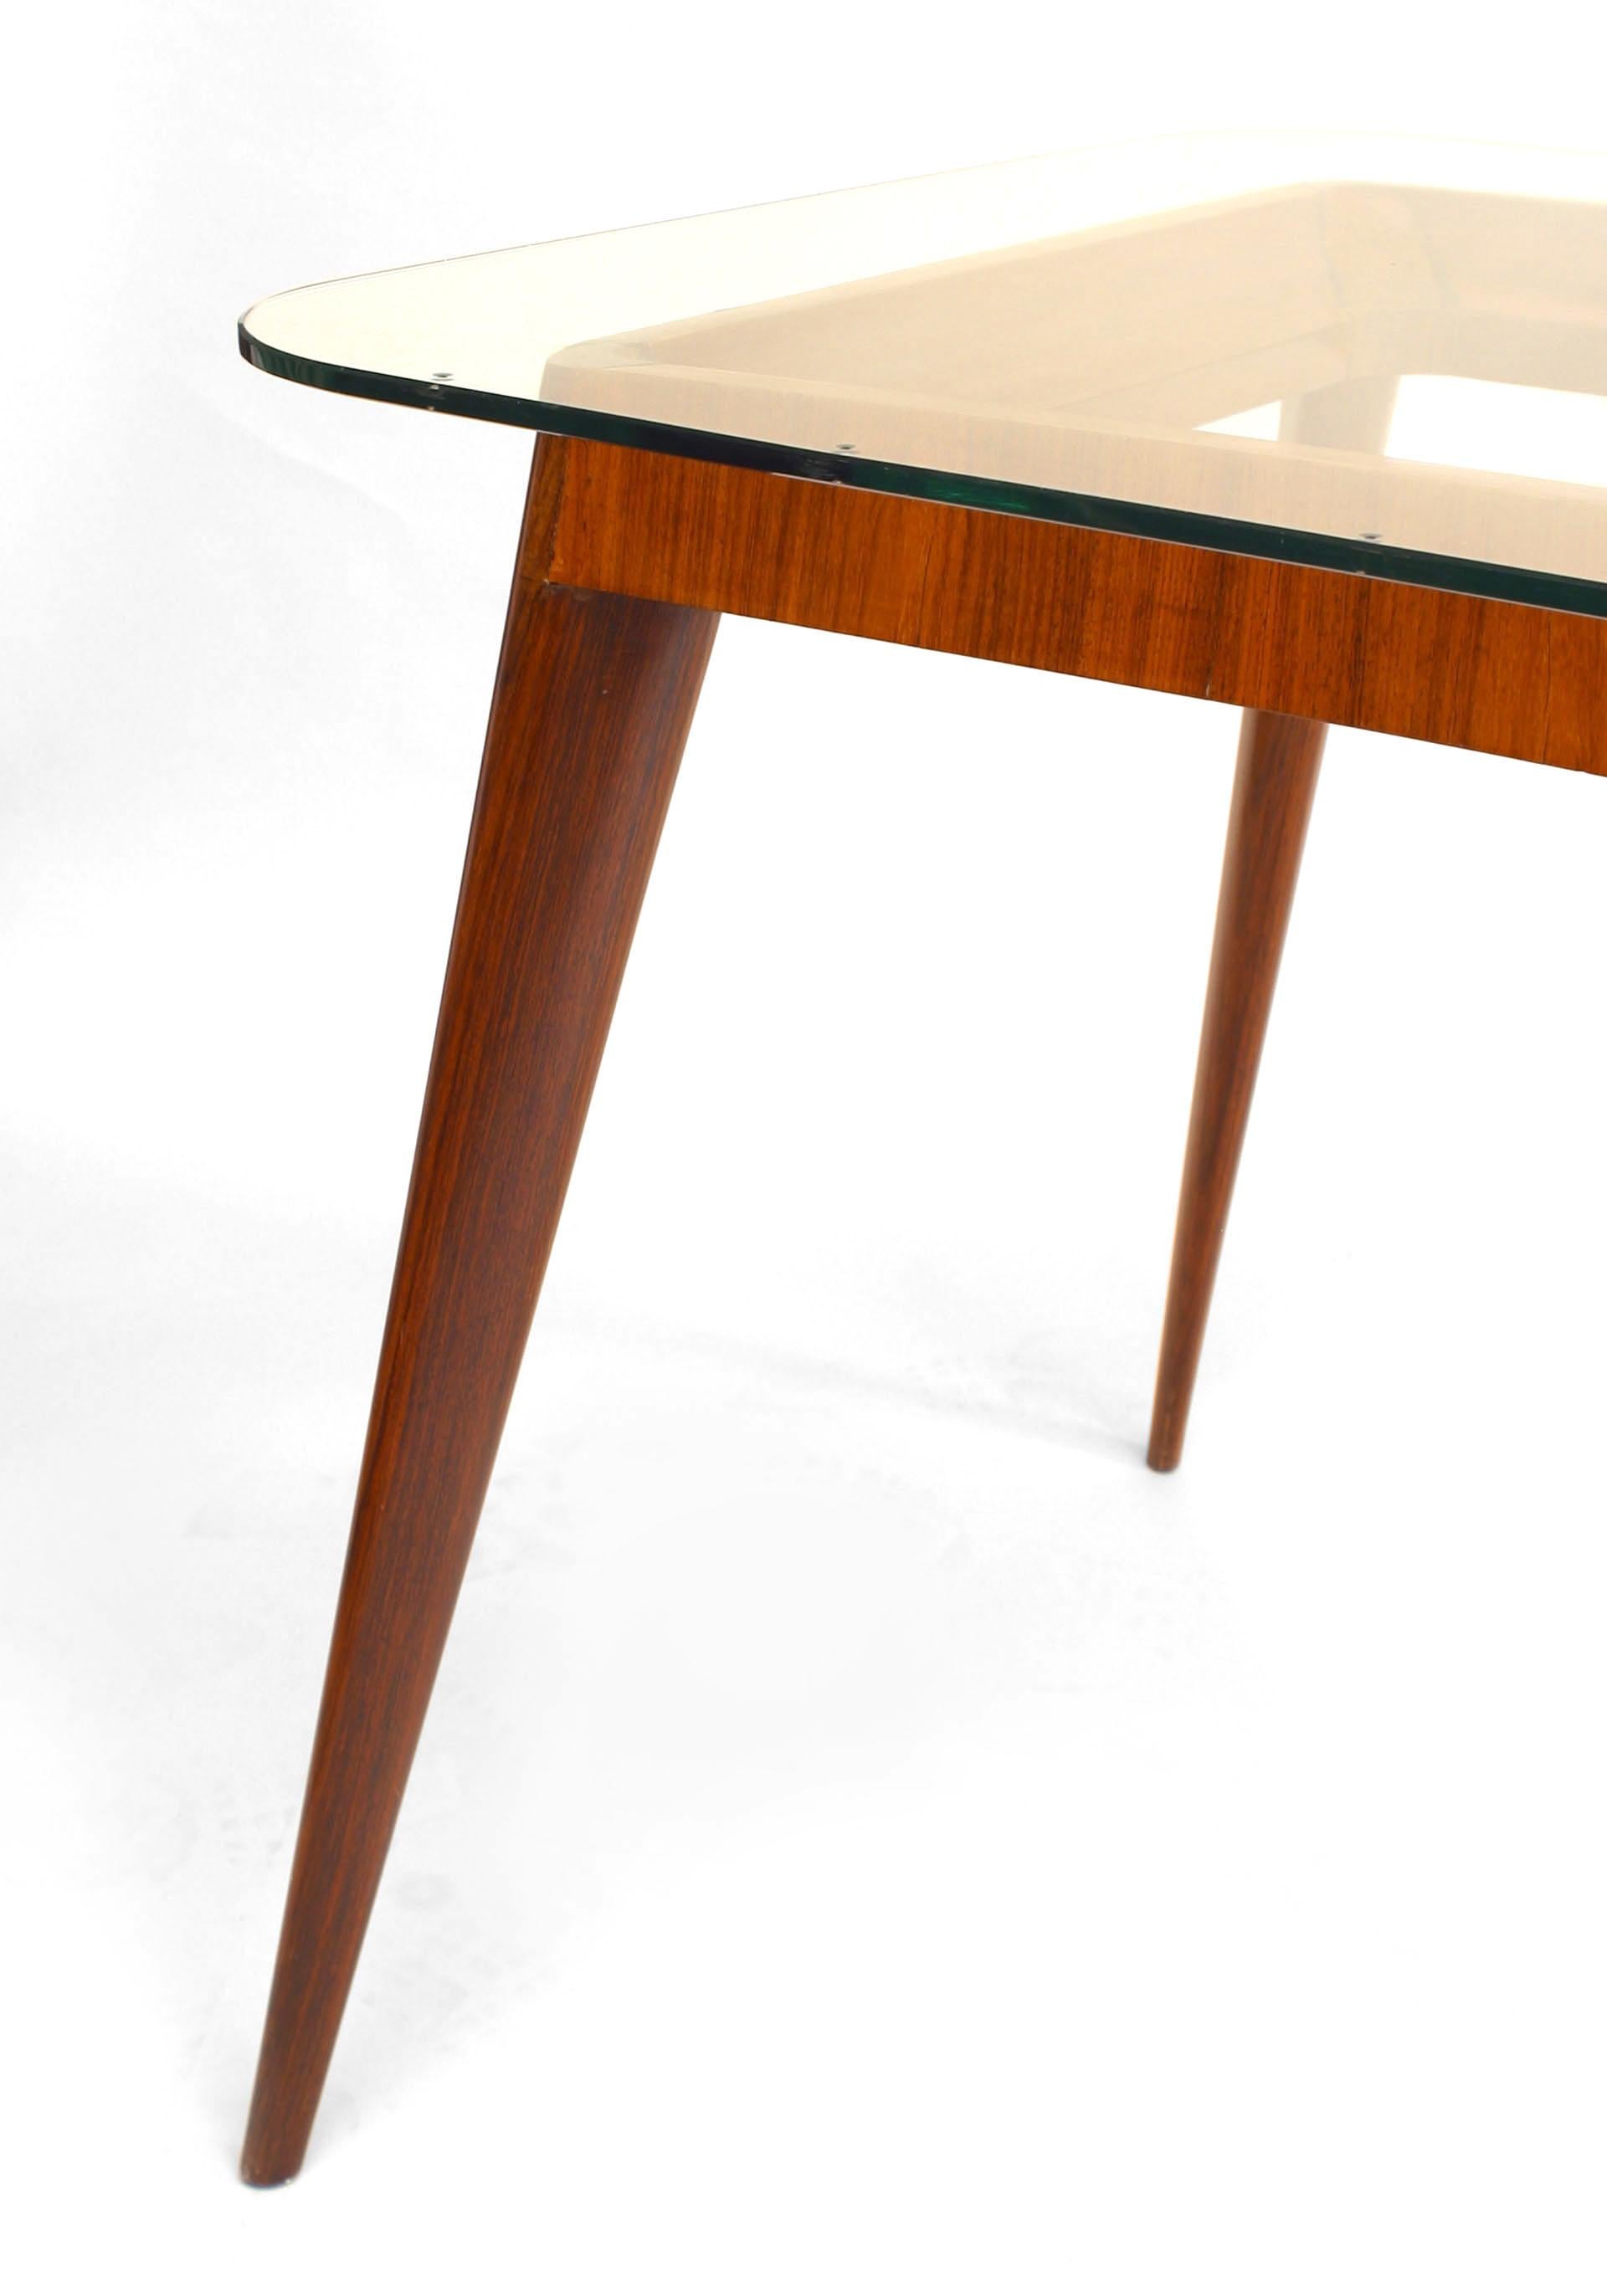 Italian Mid-Century (1950s) rosewood dining table with 4 tapers legs supporting a large glass top (Related Item: DLB181A)
